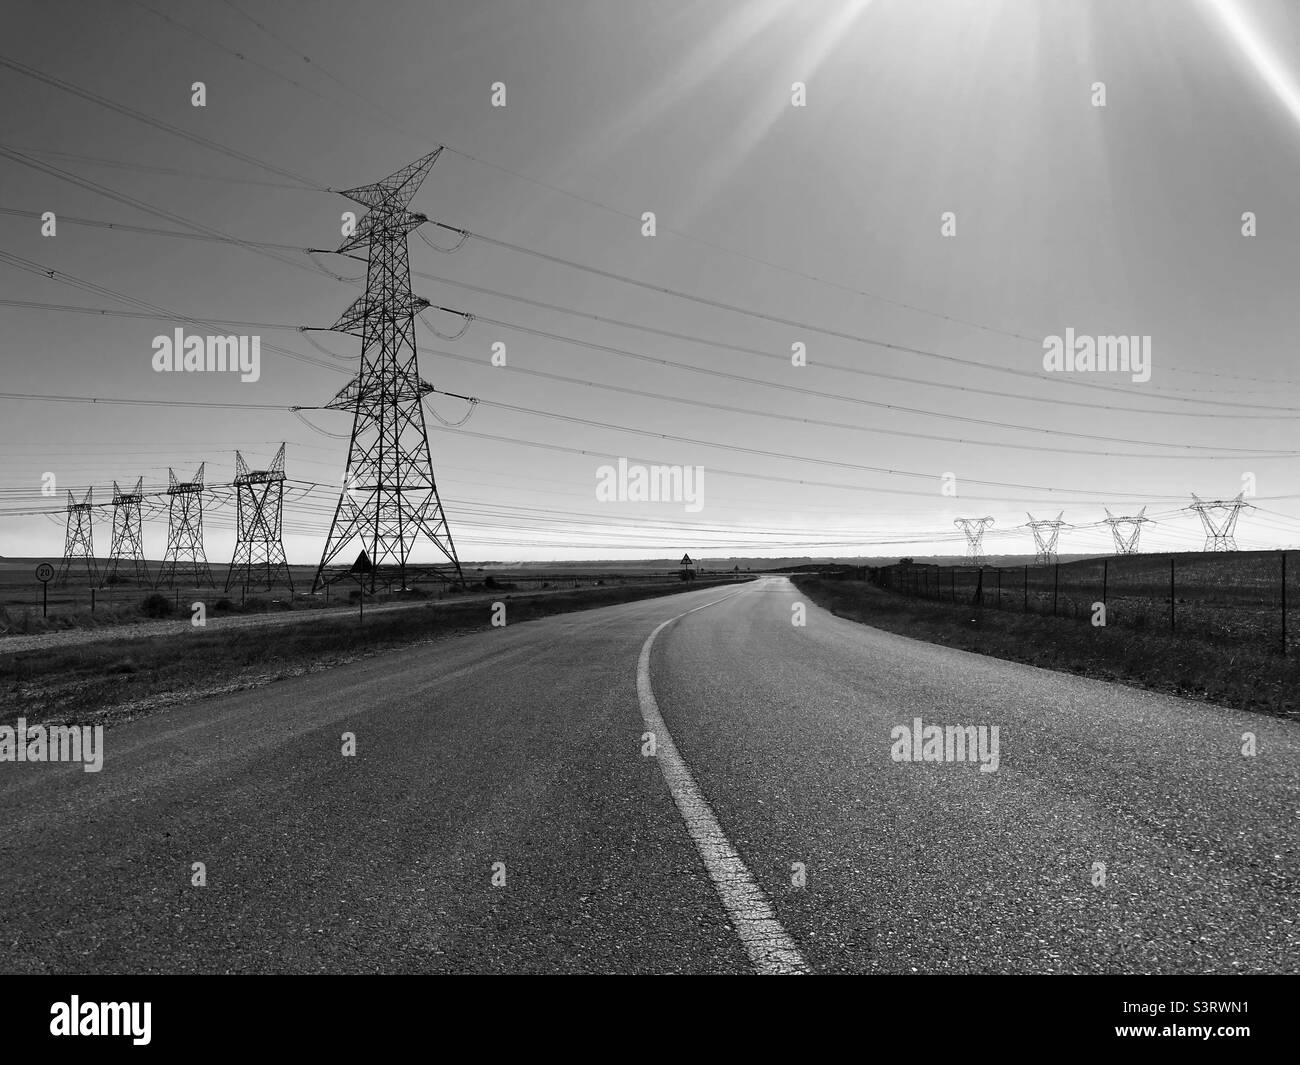 Electricity pylons high above the road Stock Photo